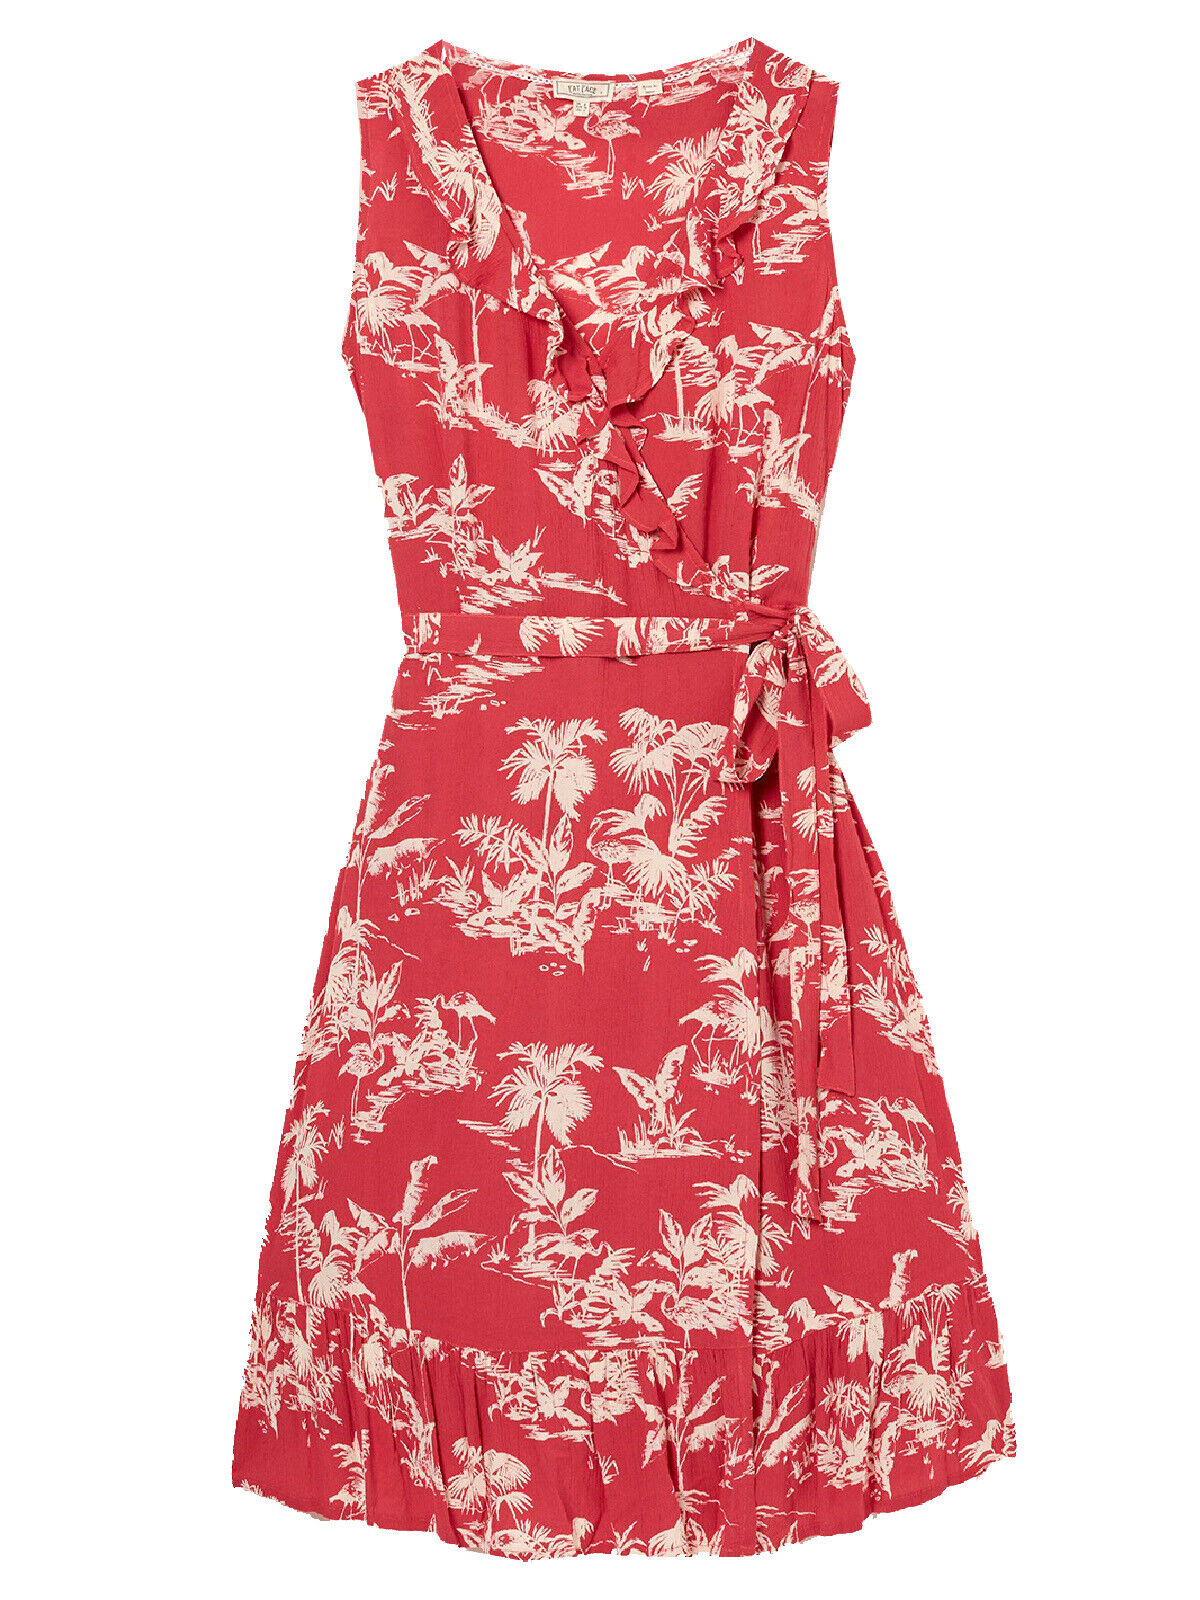 EX Fat Face Red Martha Flamingo Wrap Dress in Sizes 10, 12, 14 RRP £49.50